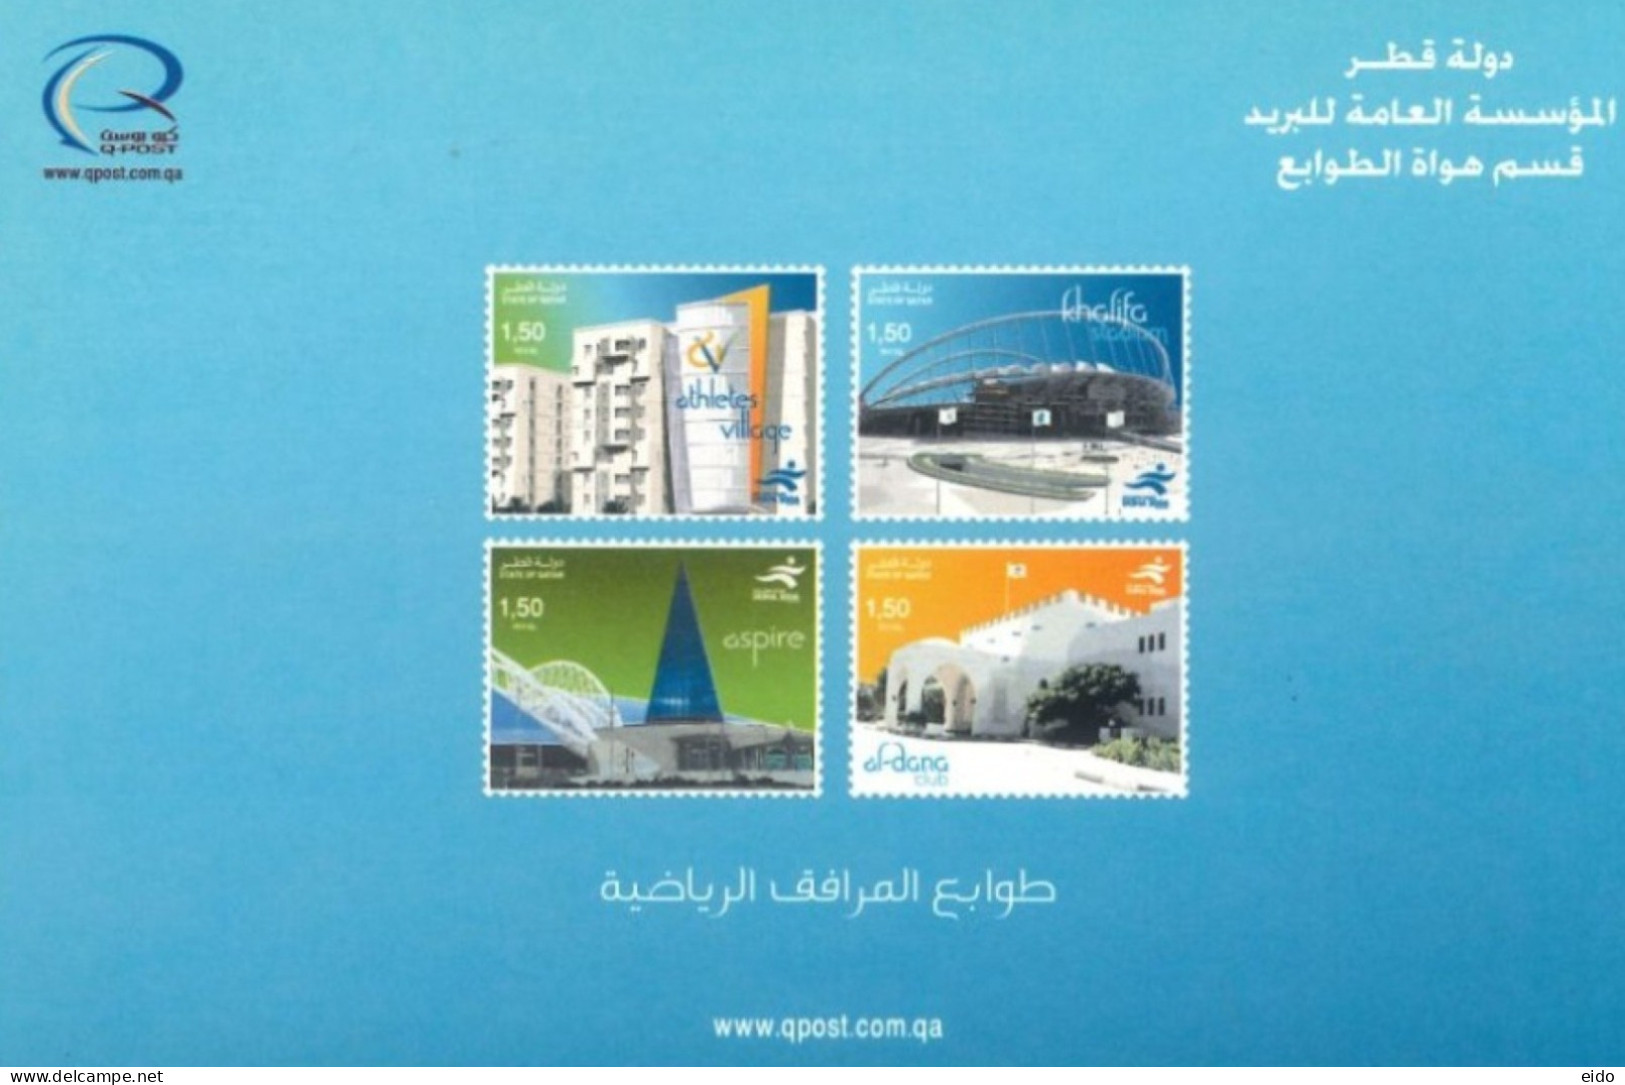 QATAR  - 2006, POSTAL STAMP BULETIN OF SPORTS VENUE STAMPS AND TECHNICAL DETAILS. - Qatar